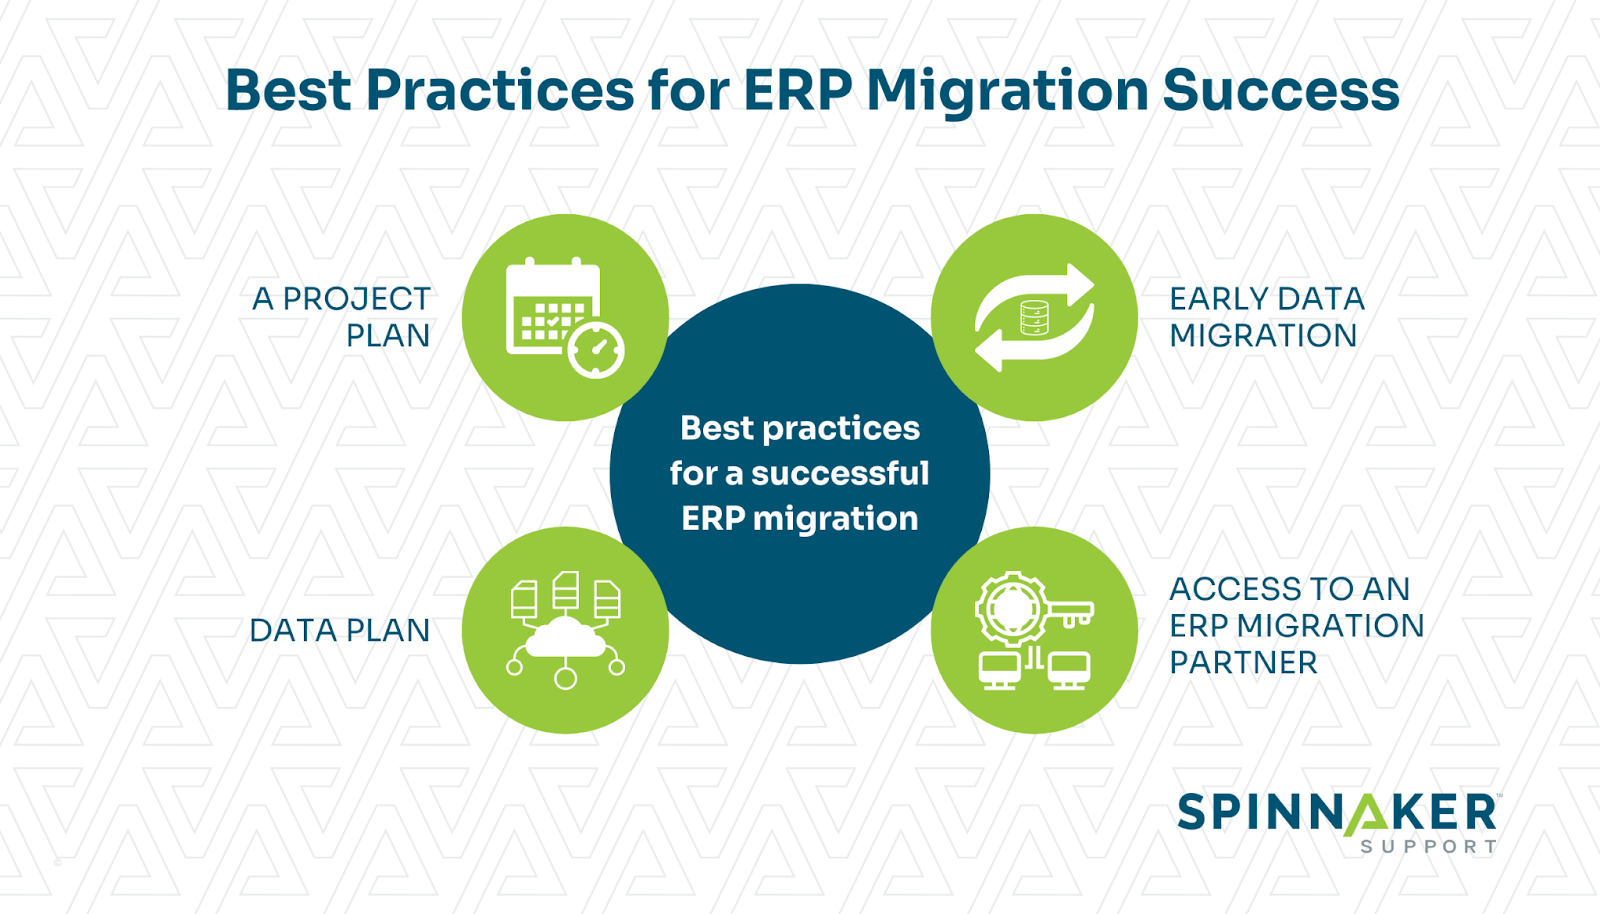 Tips on how to migrate to a new ERP system successfully